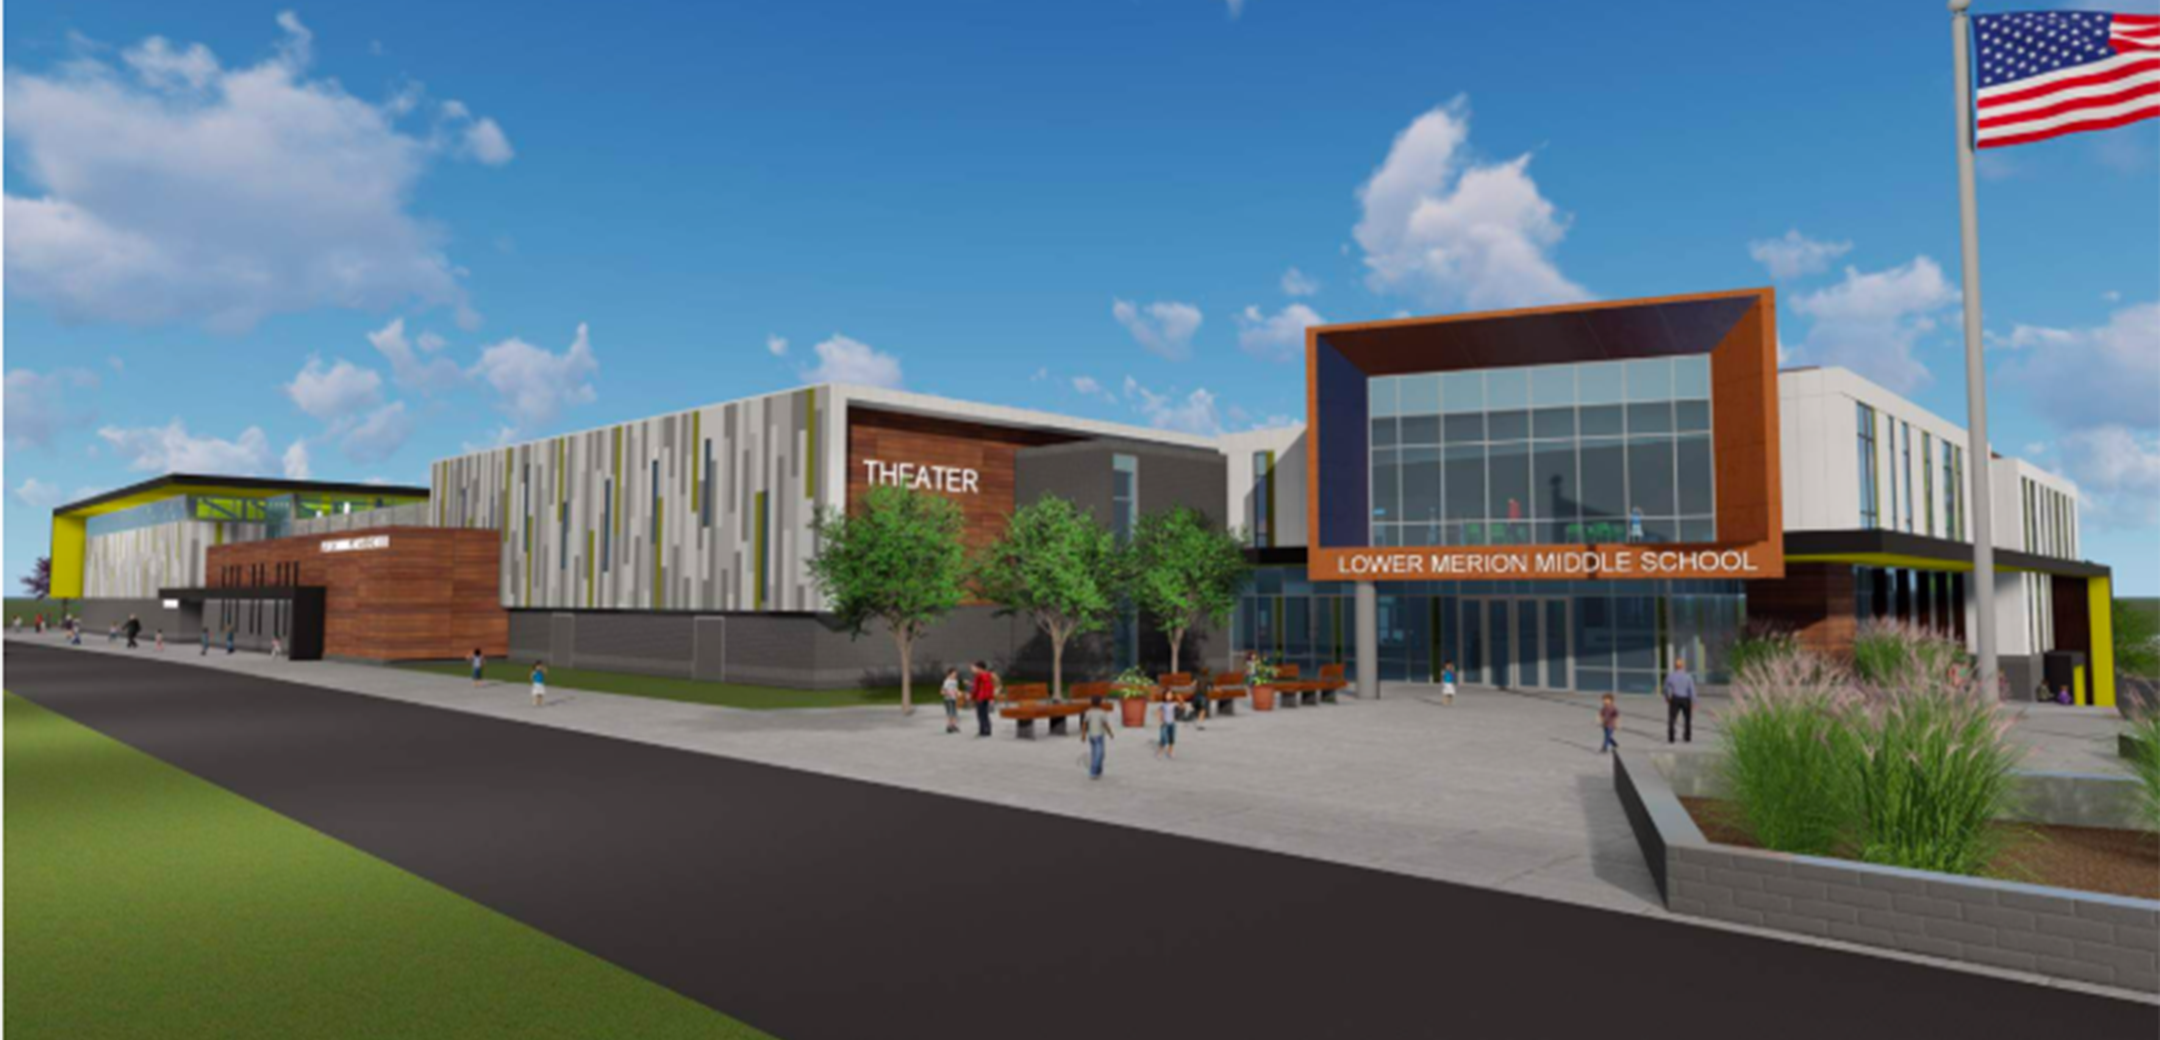 A rendering of the Lower Merion Middle School front main entrance featuring the main walkway decorated with trees and a theater sign on the left side of the building.